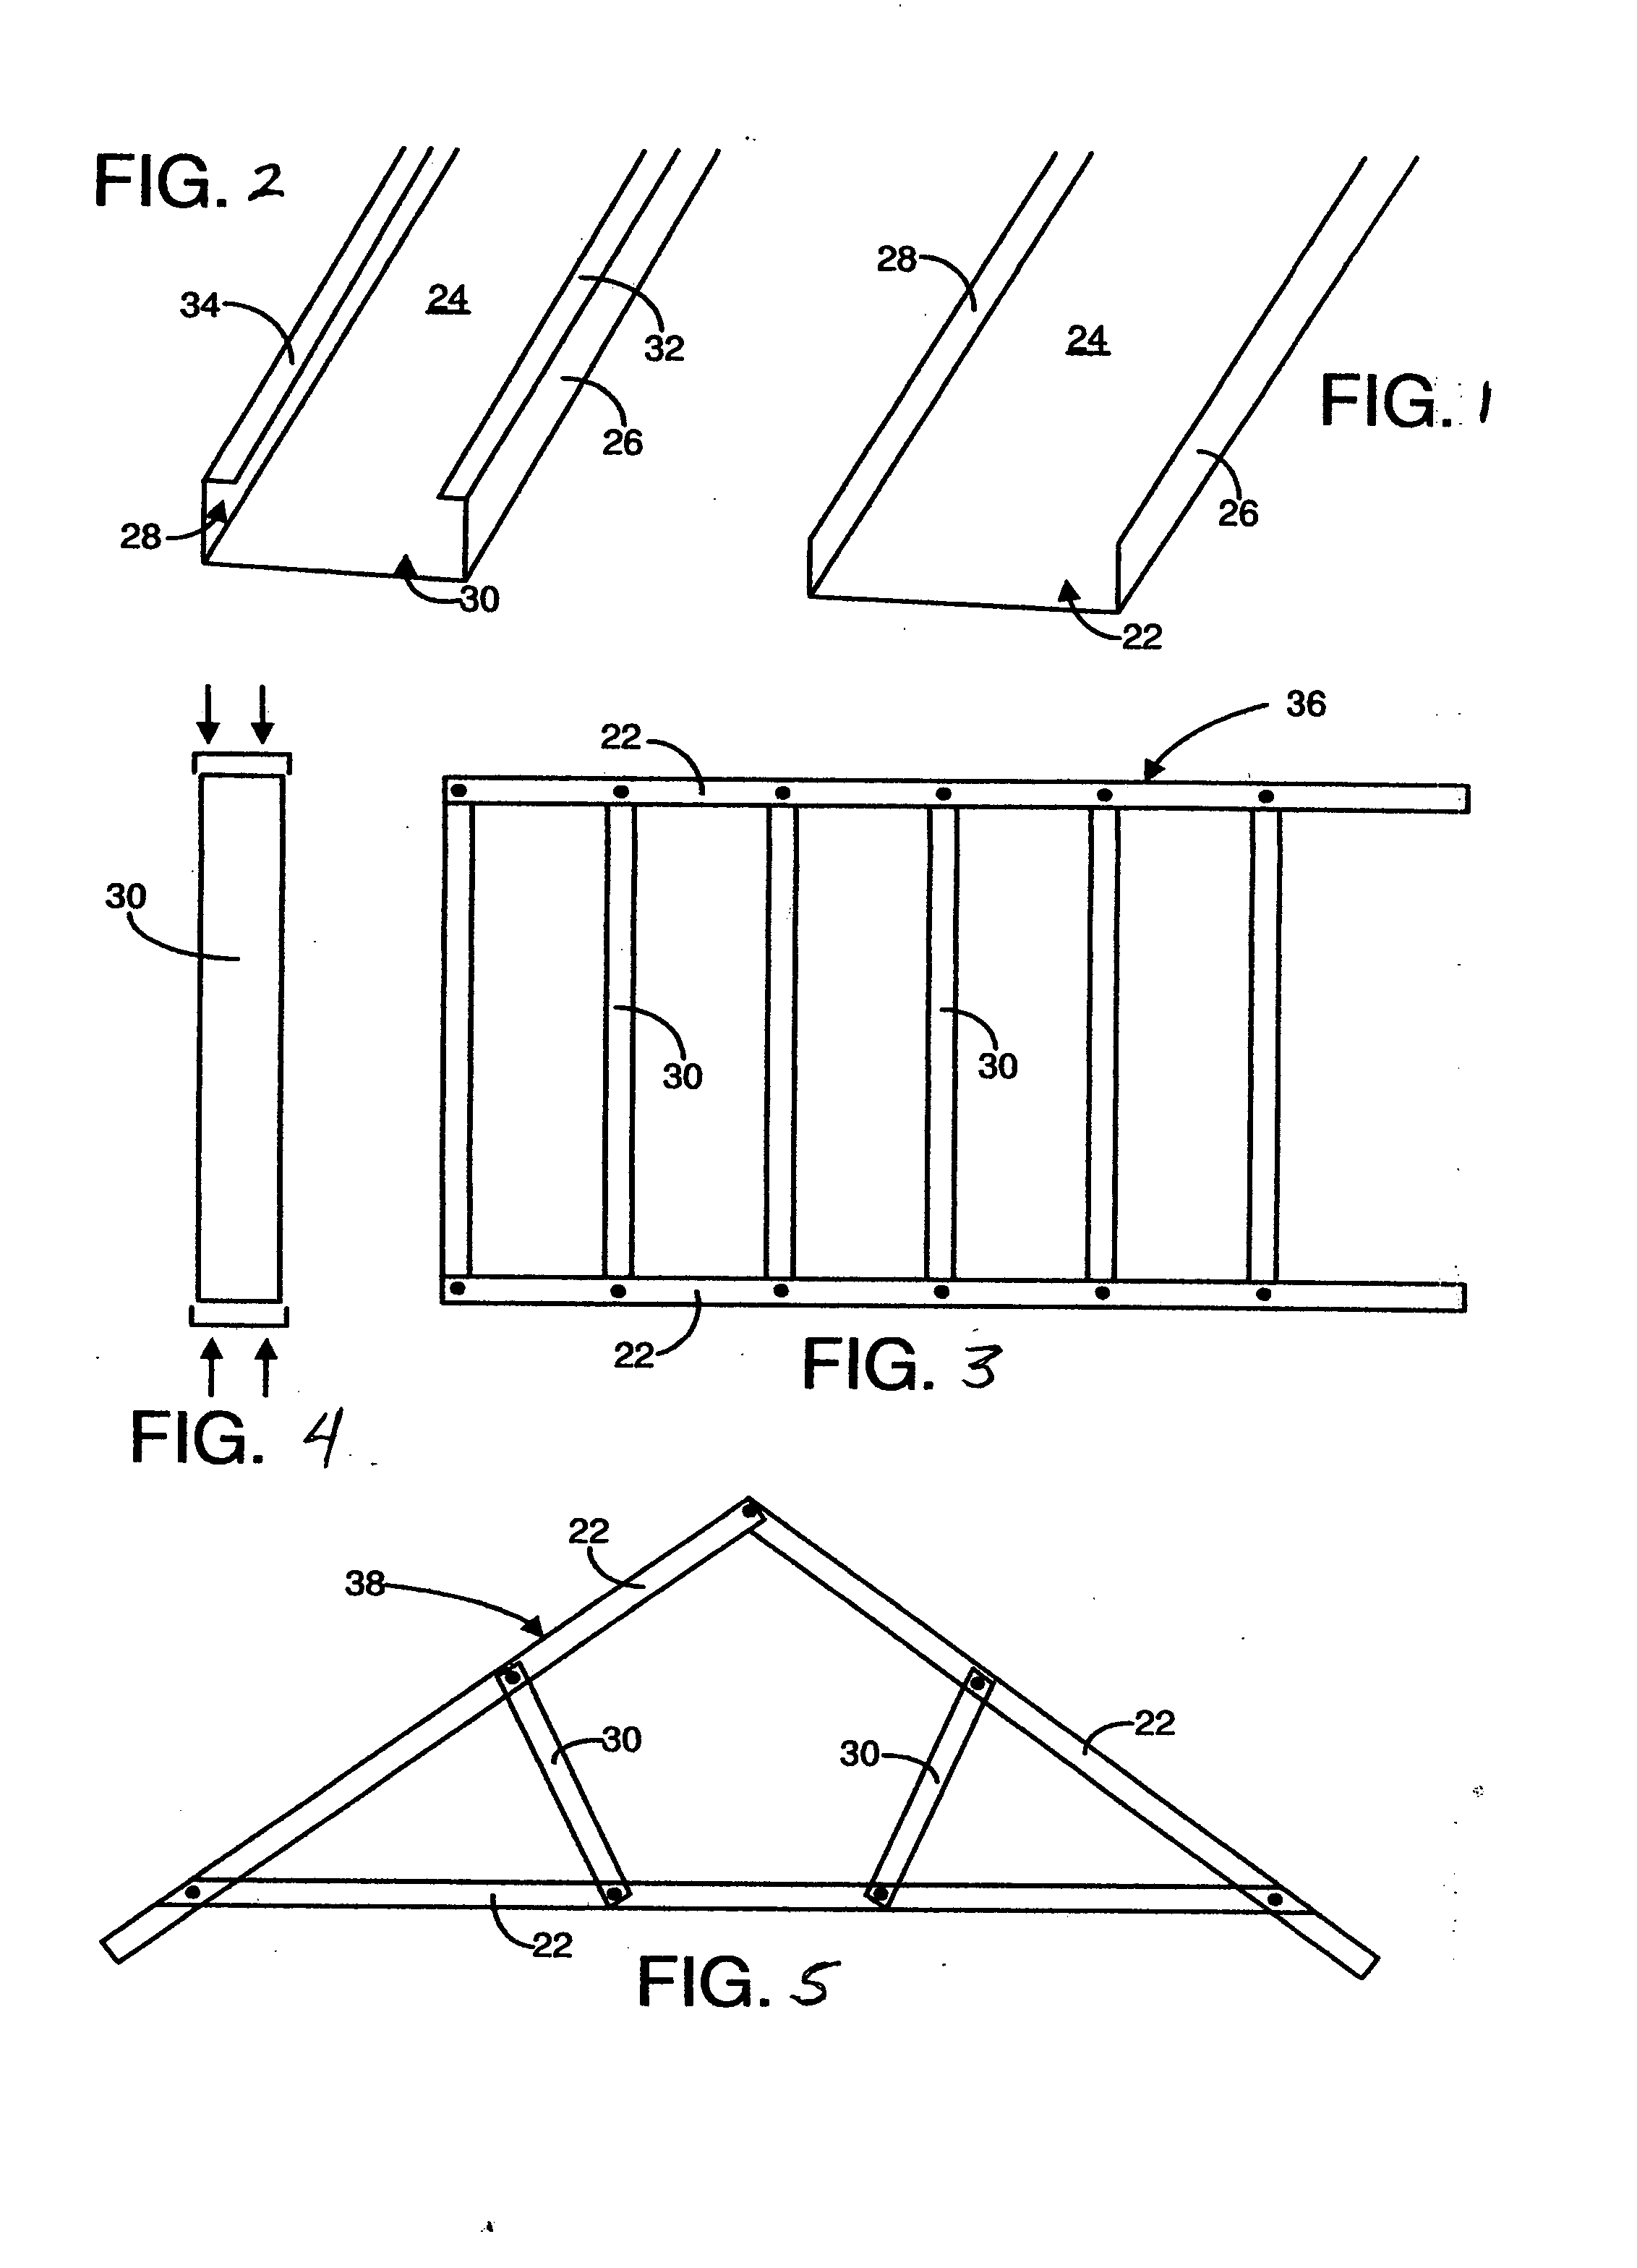 Foldable metal wall frame assemblies for use in residential and commercial structures